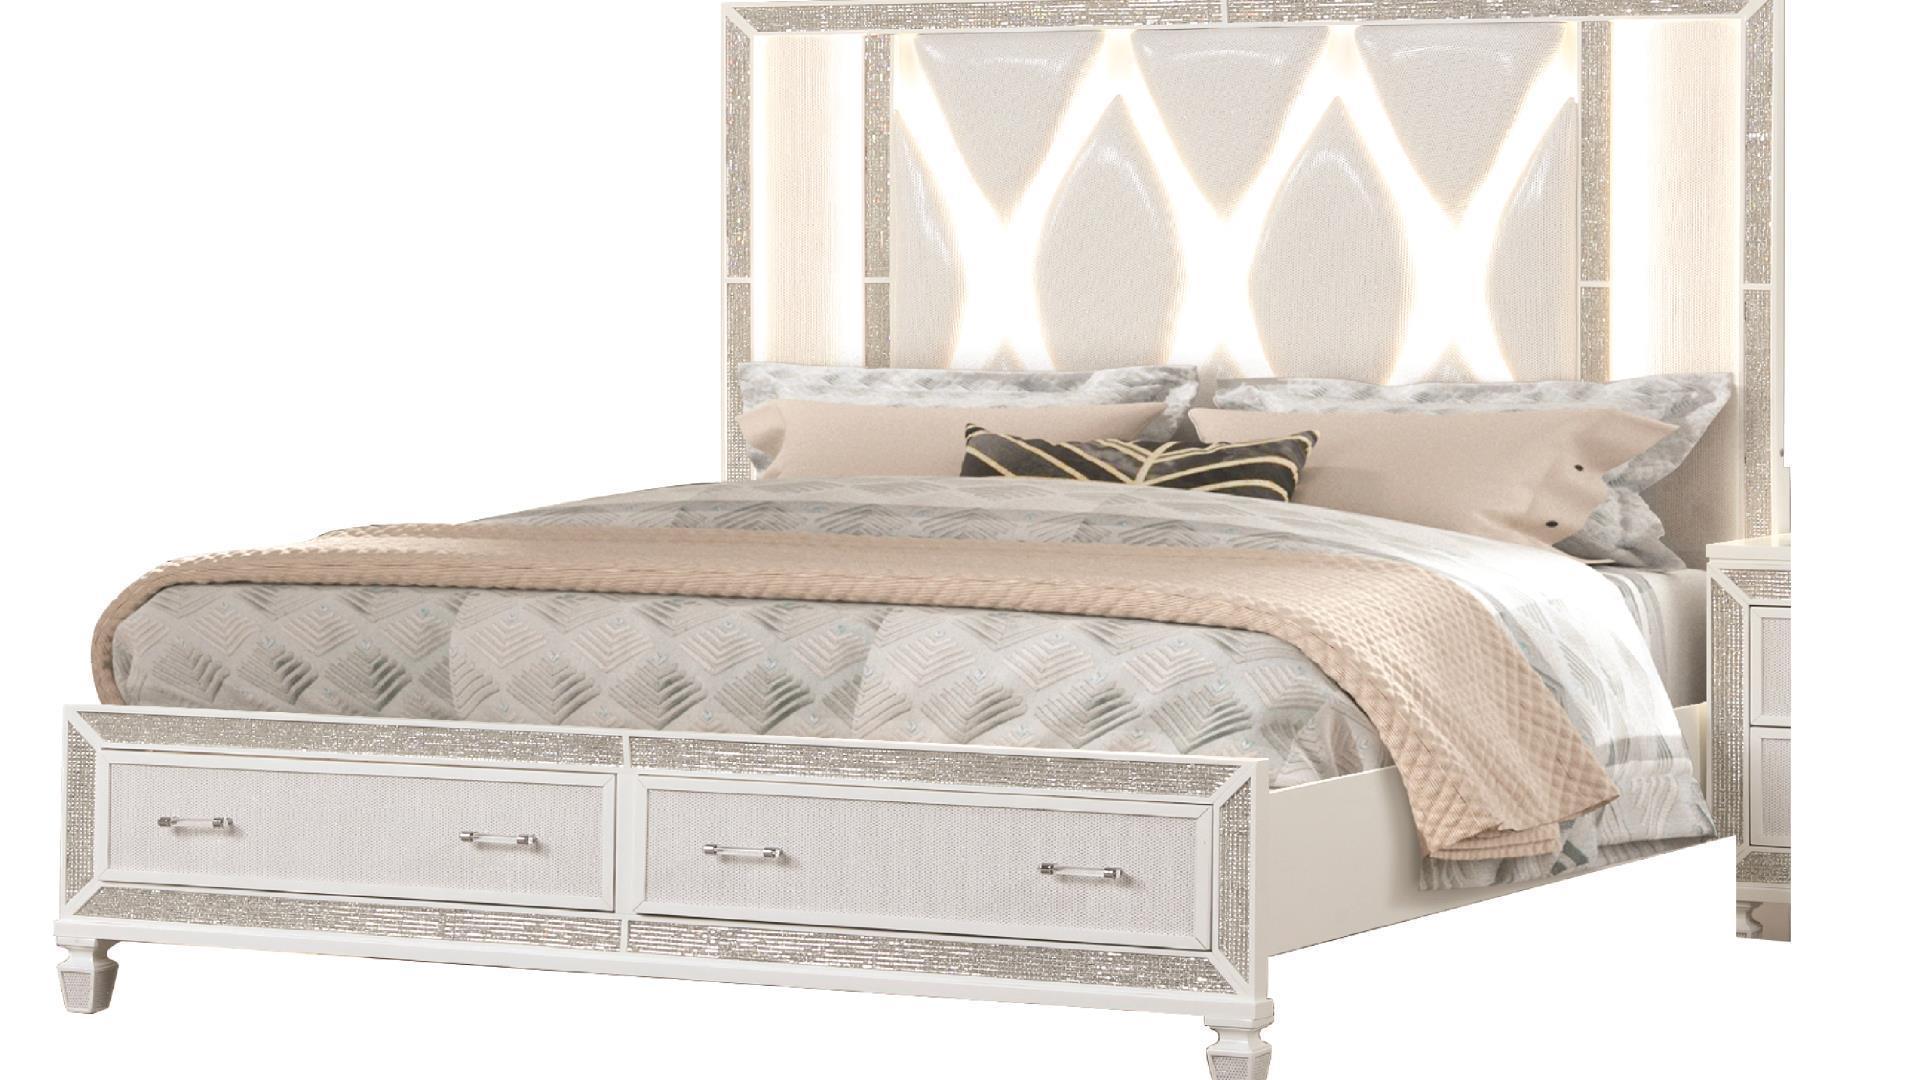 

    
Glam White Solid Wood King Bed CRYSTAL Galaxy Home Modern Contemporary
